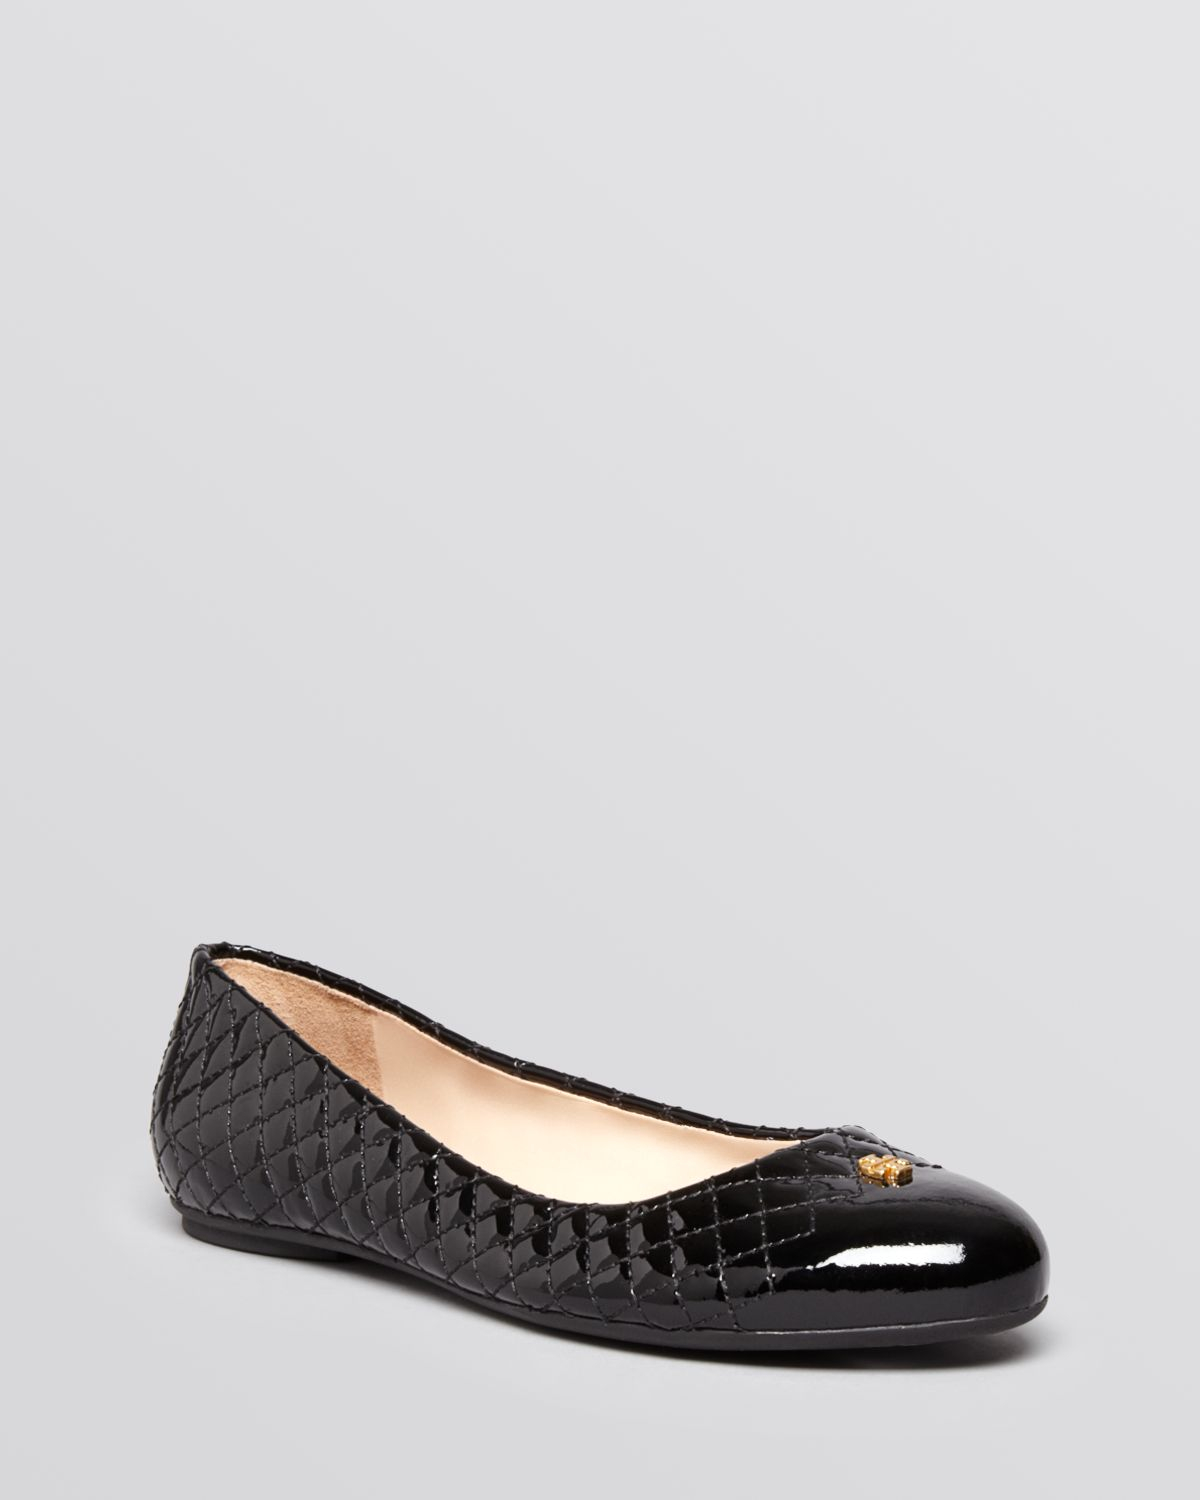 Tory Burch Cap Toe Ballet Flats - Kent Quilted in Black | Lyst